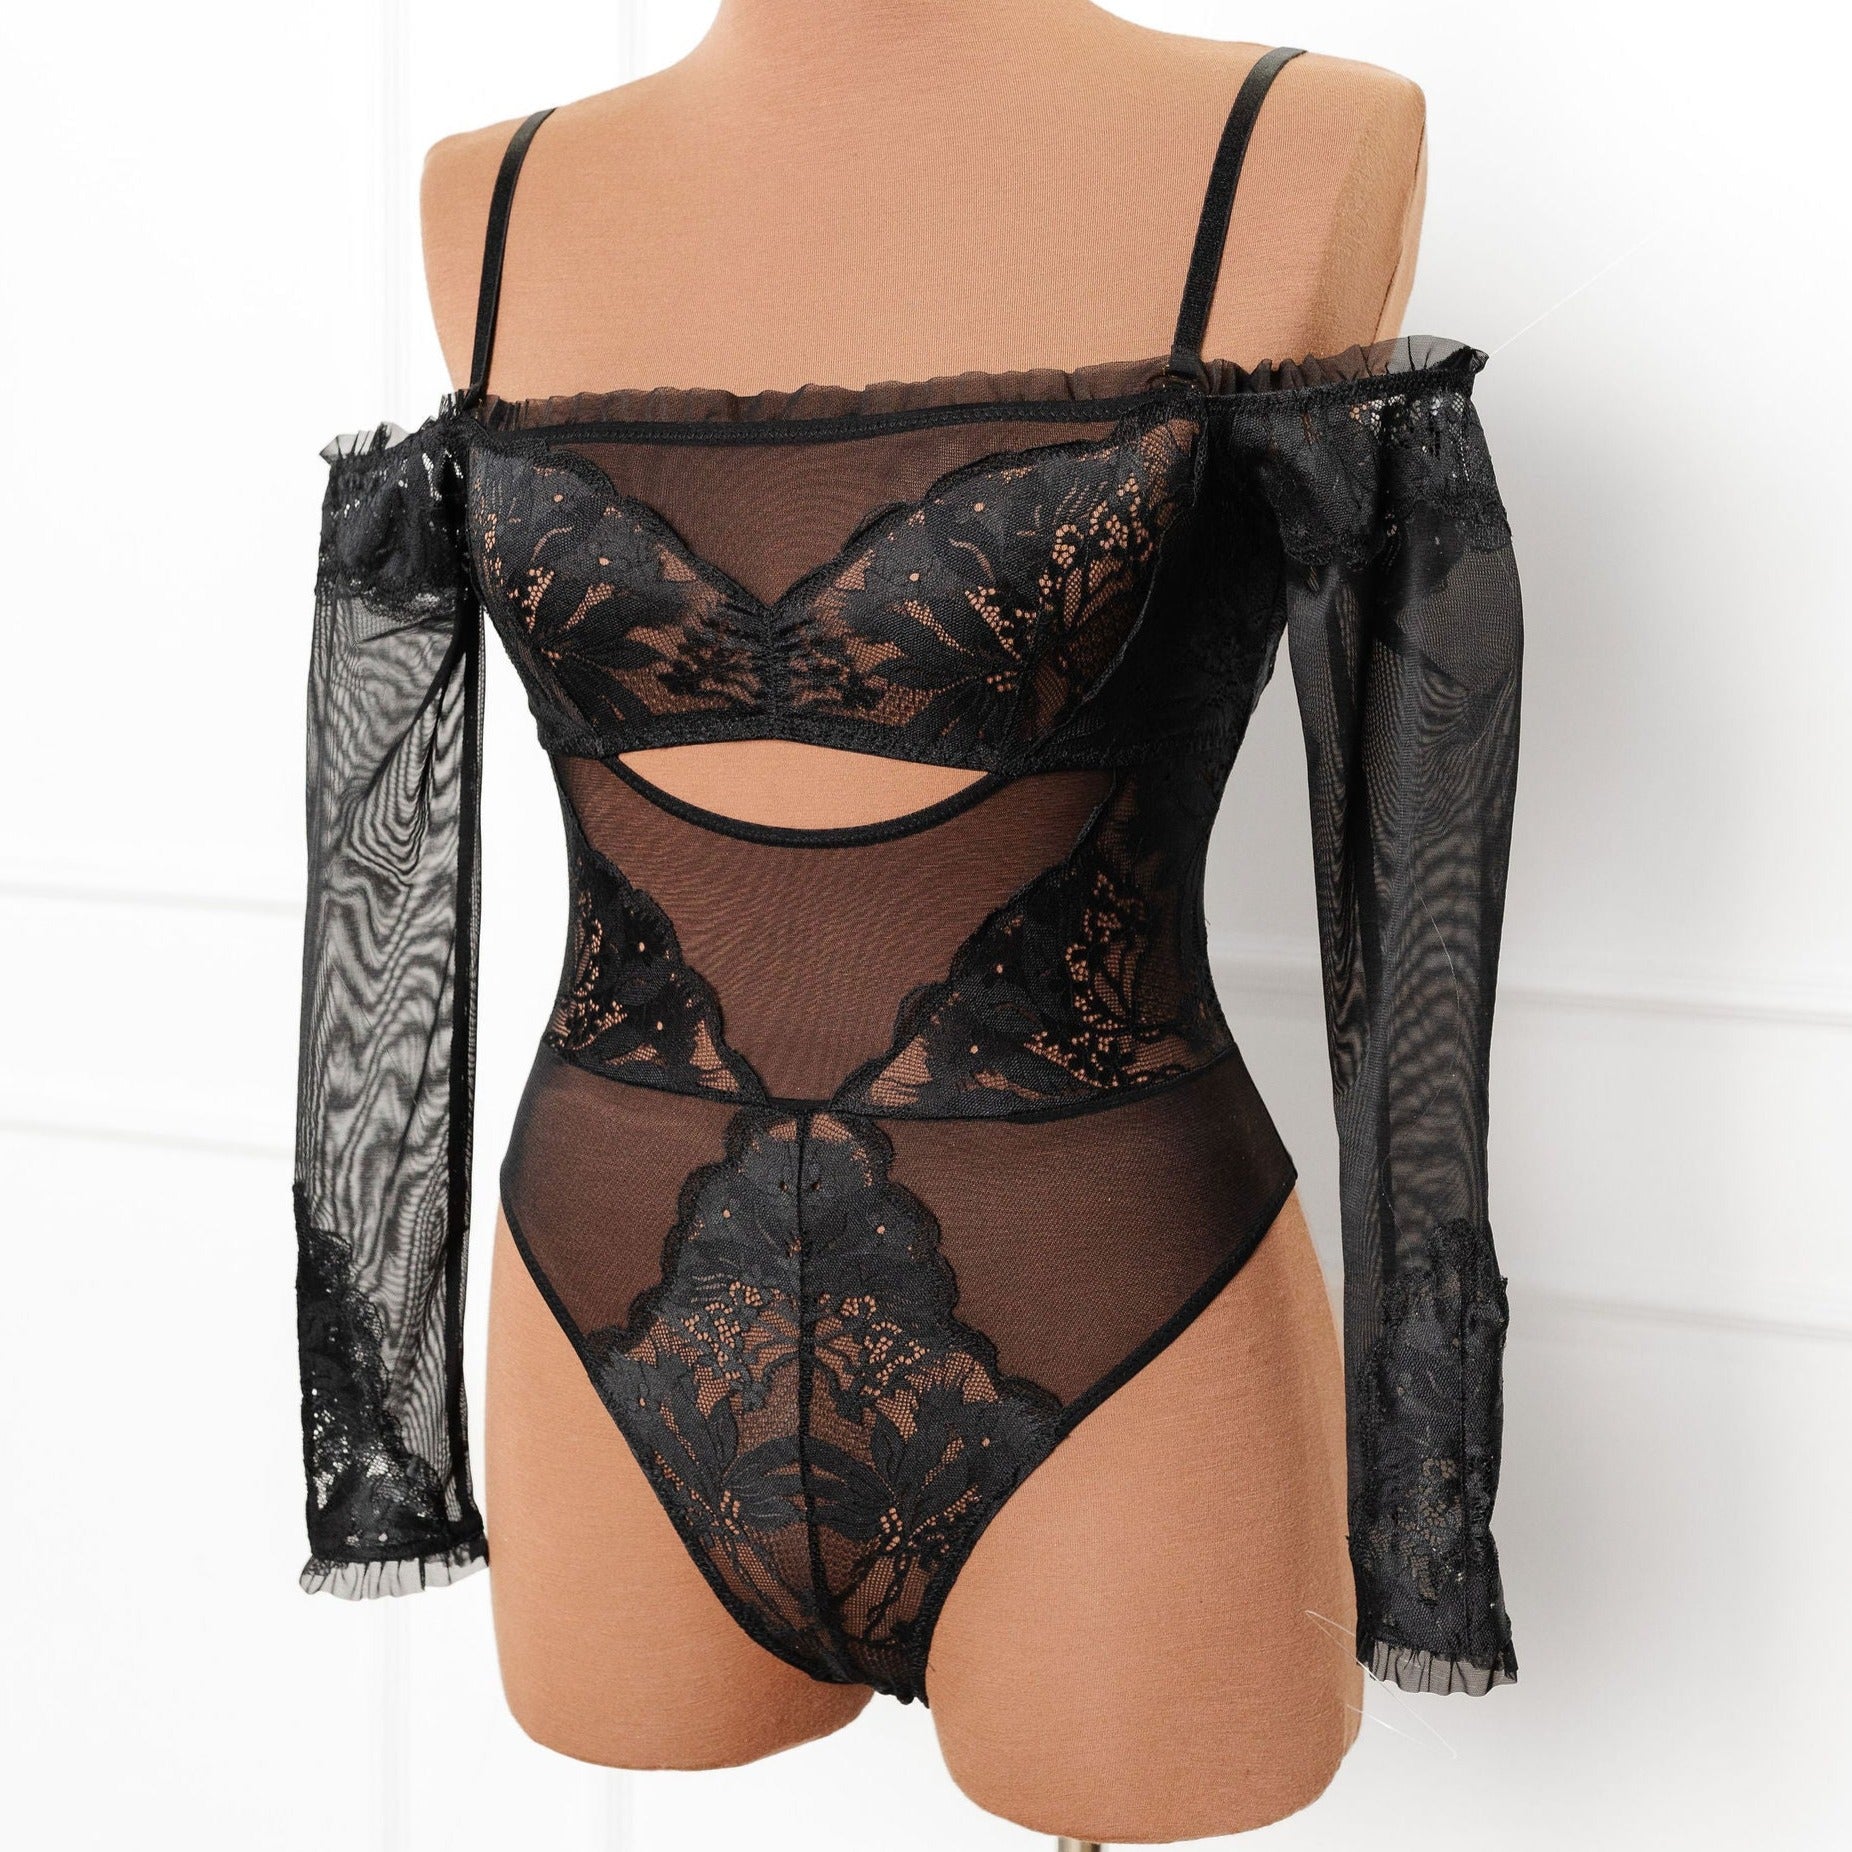 Lace & Mesh Off-The-Shoulder Crotchless Teddy - Black by Mentionables